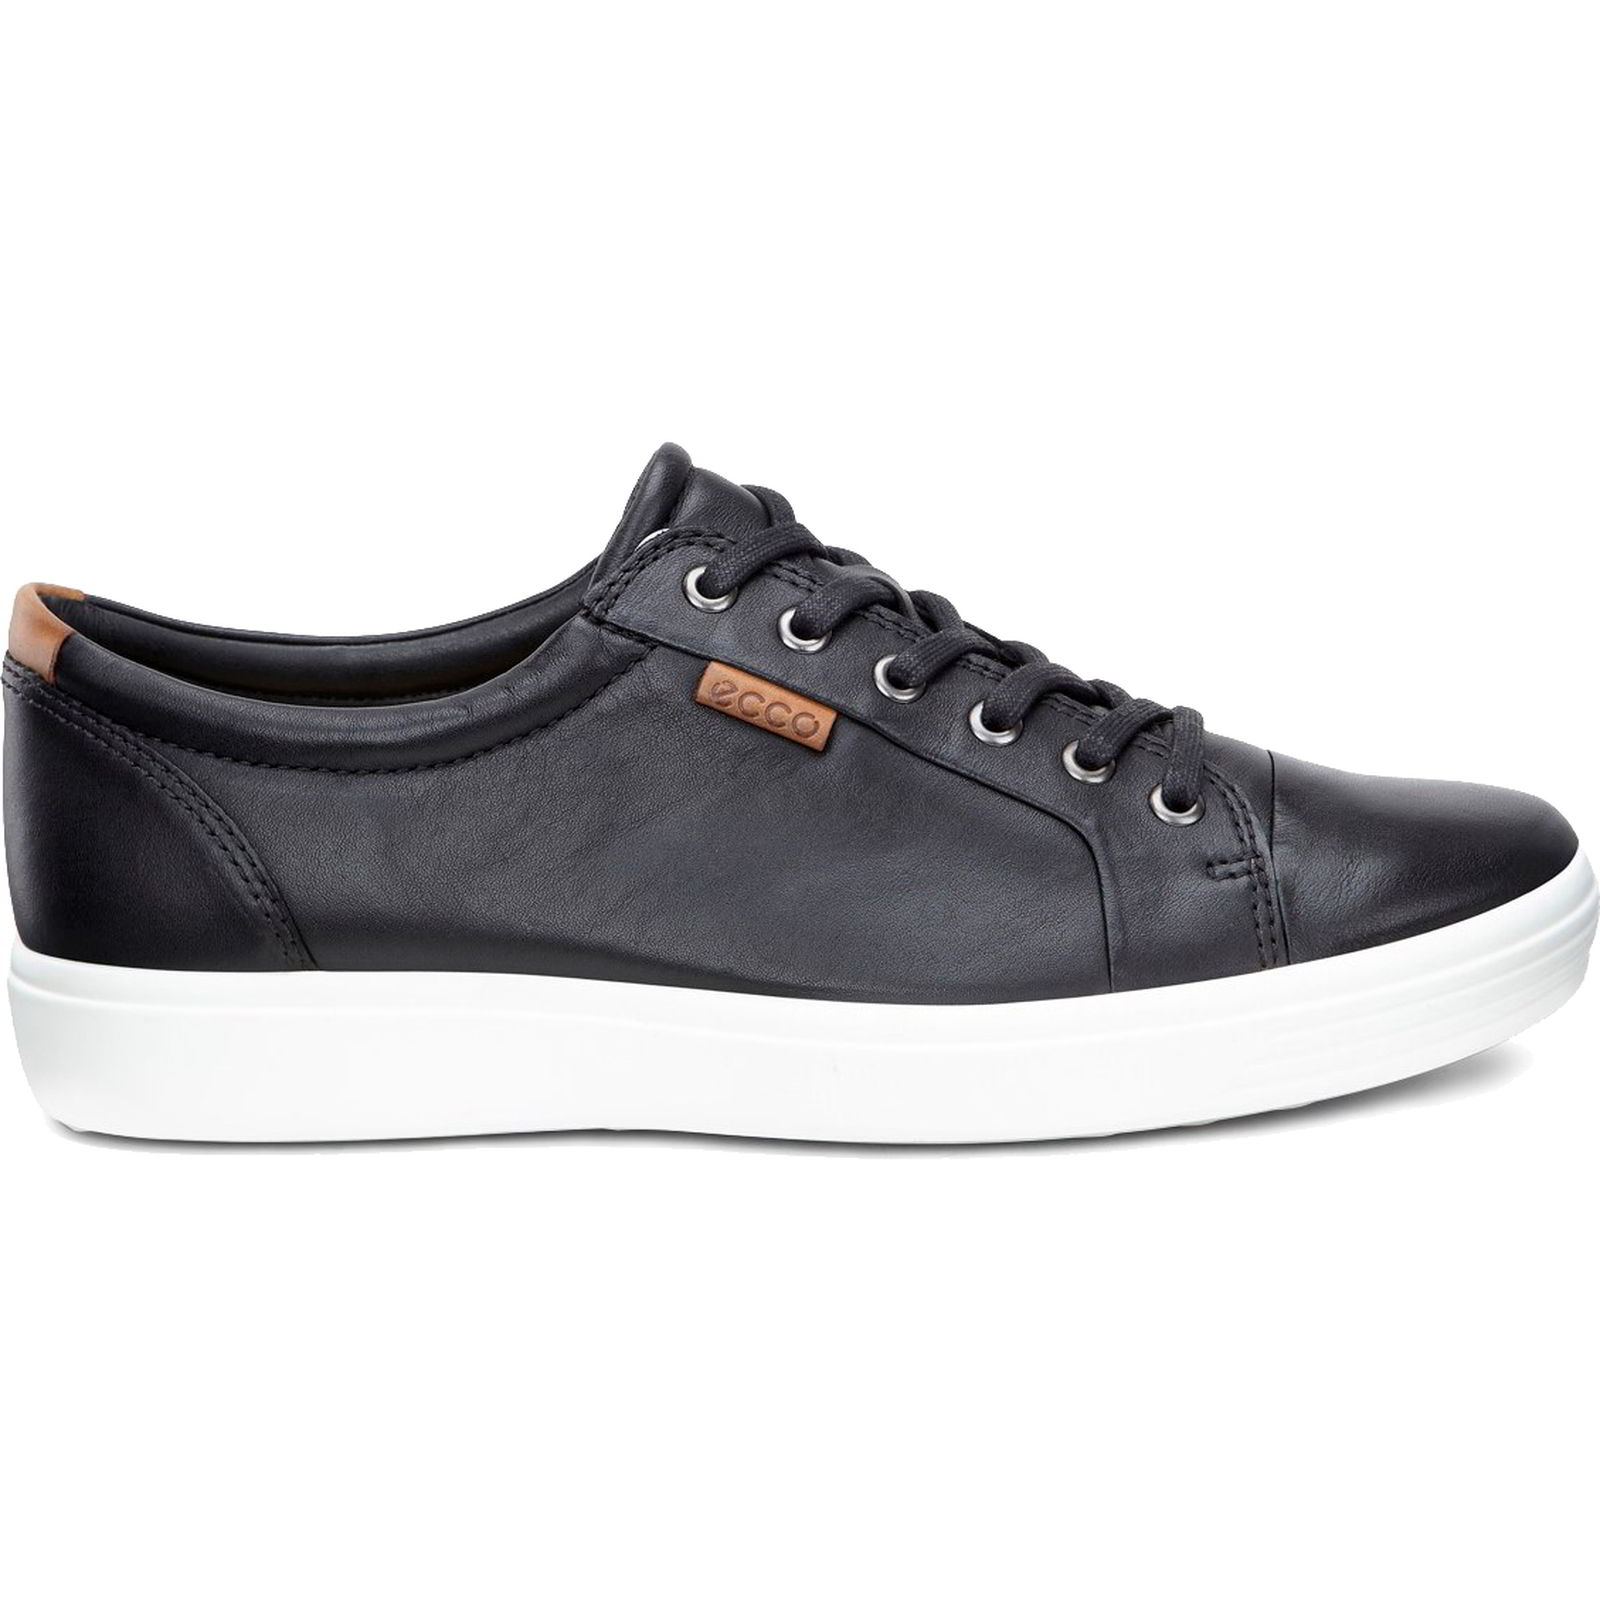 Ecco Shoes Mens Soft 7 Leather Trainers - Black 2951